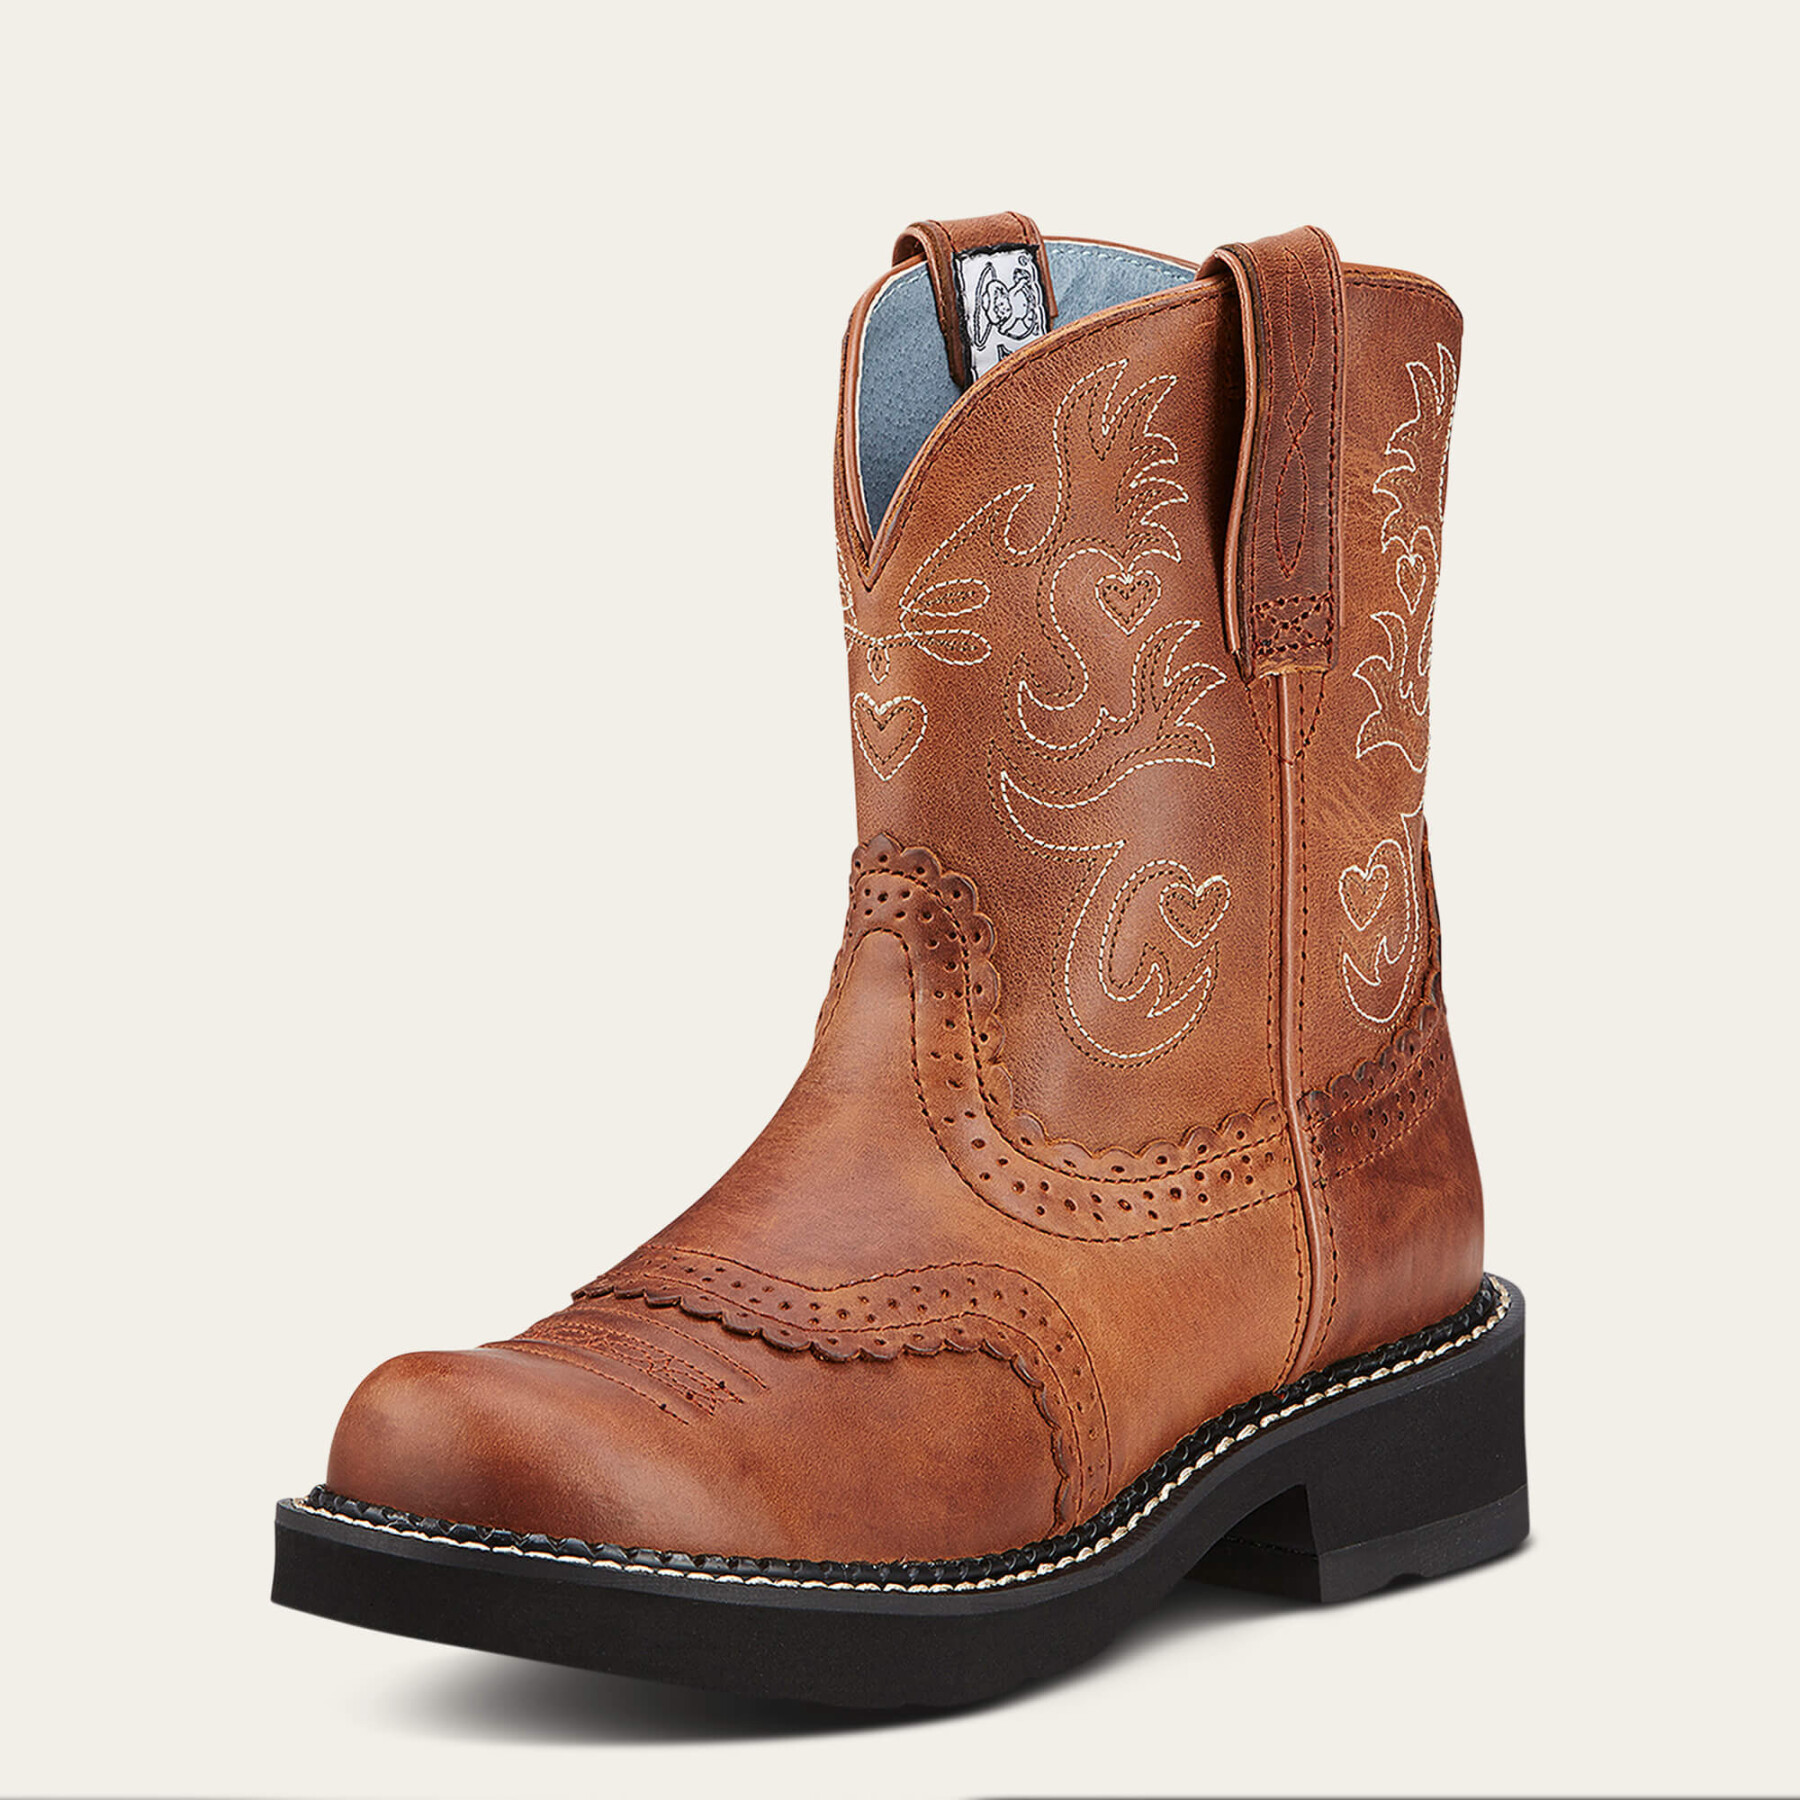 Women's leather western boots Ariat Fatbaby Saddle